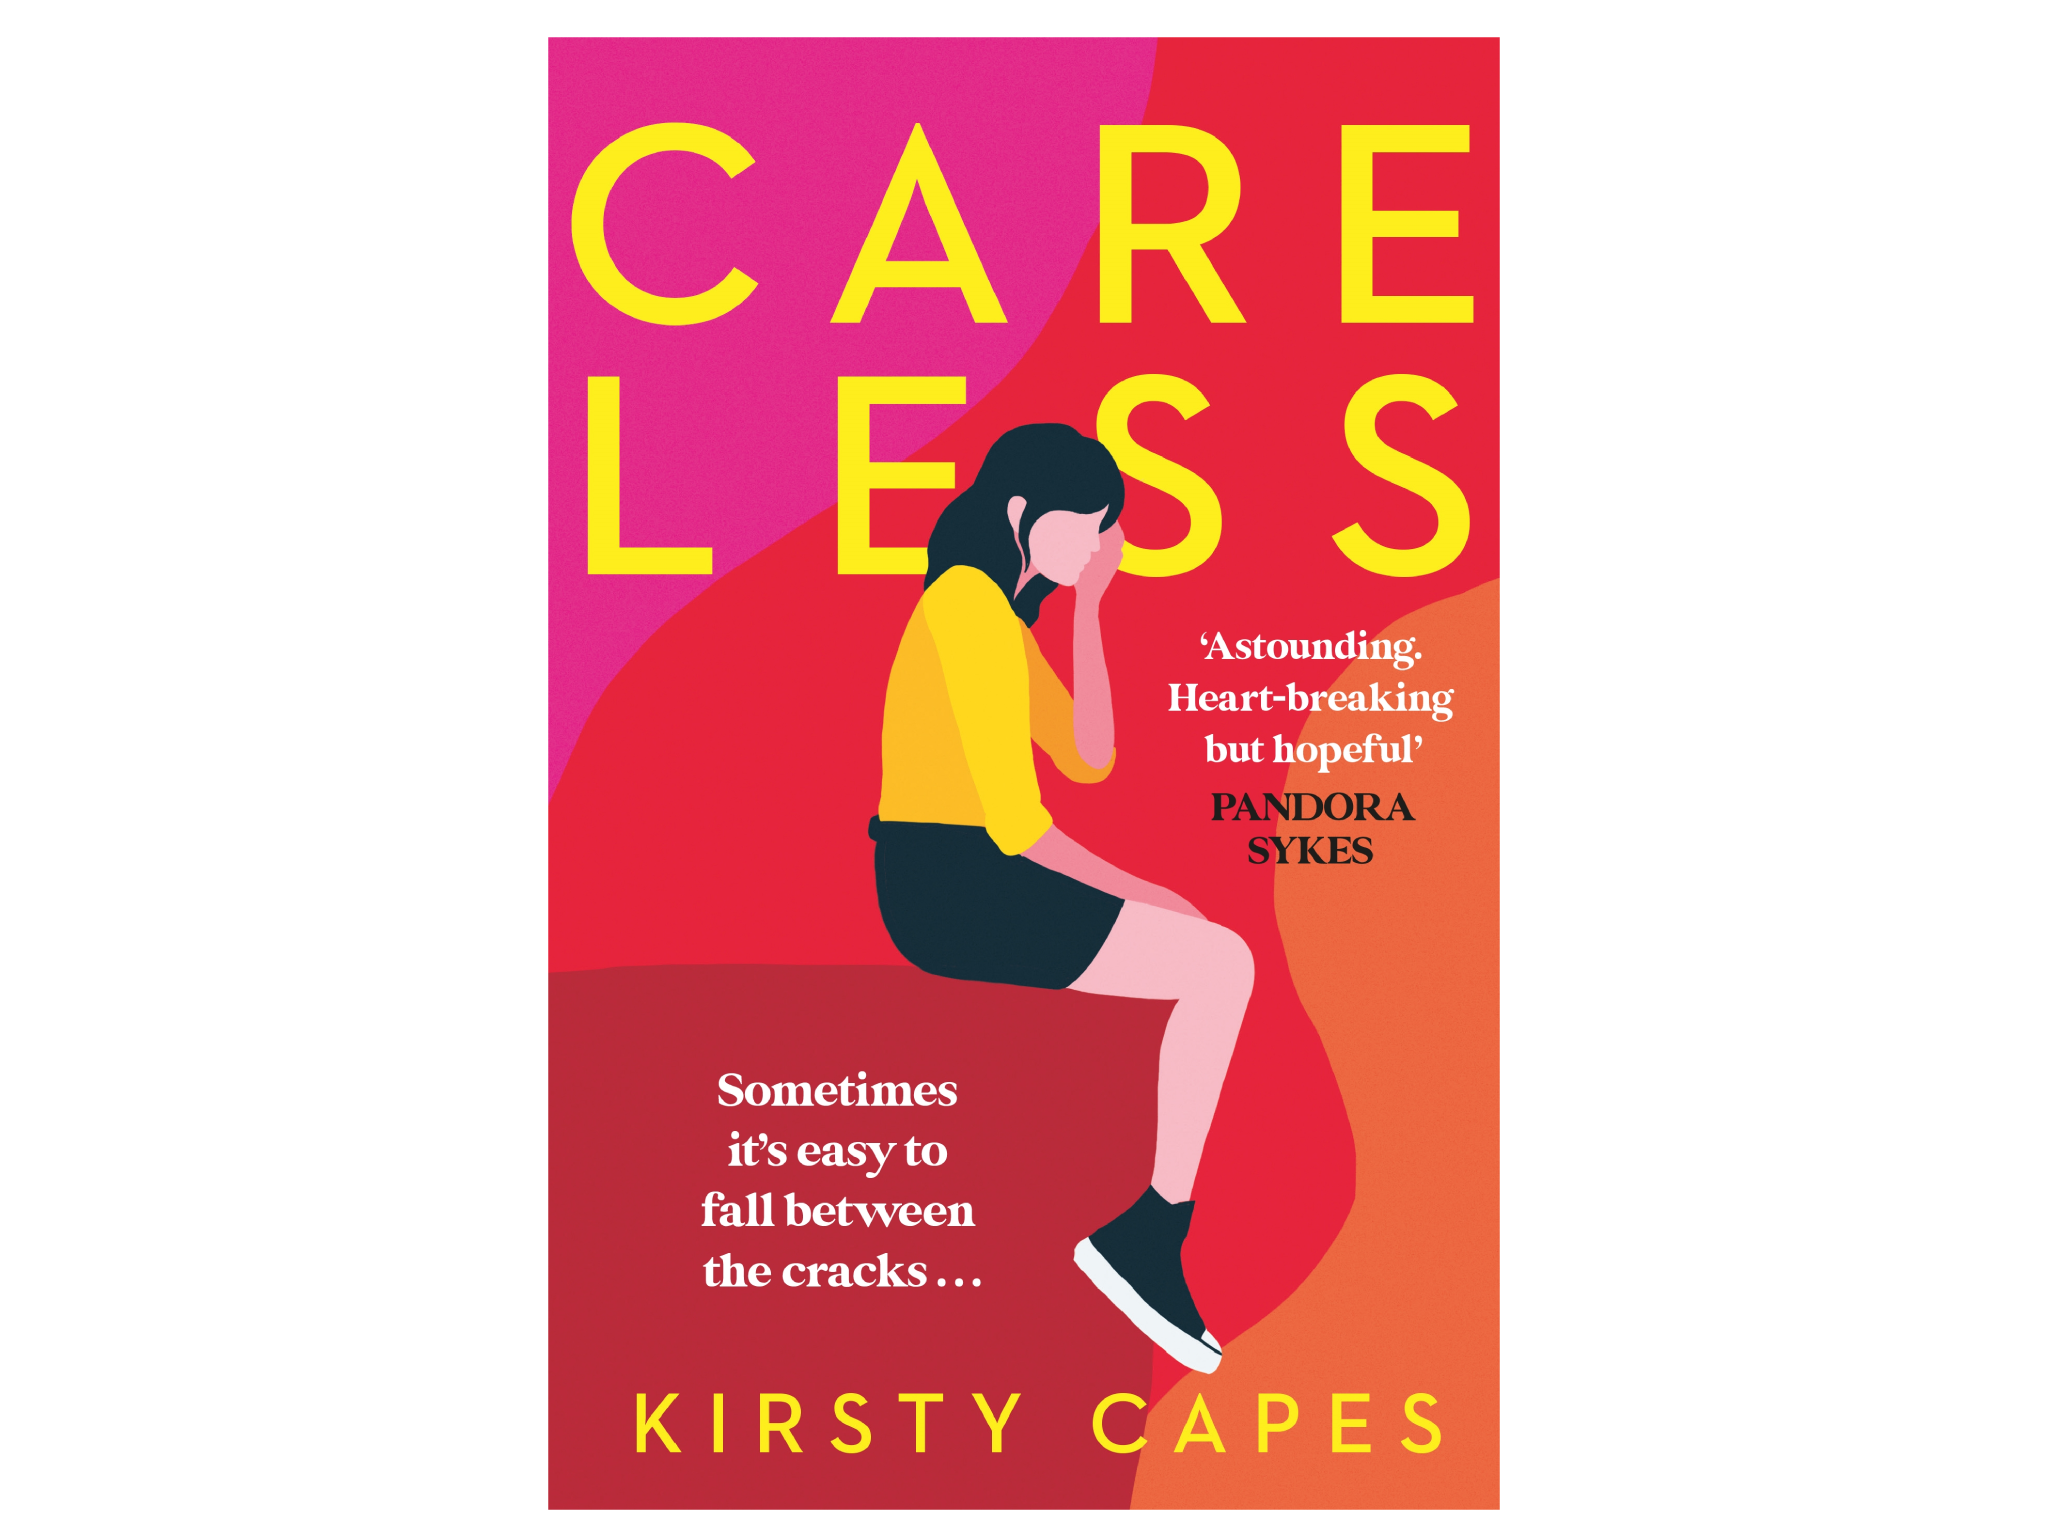 Careless-womens-prize-for-fiction-longlist-indybest